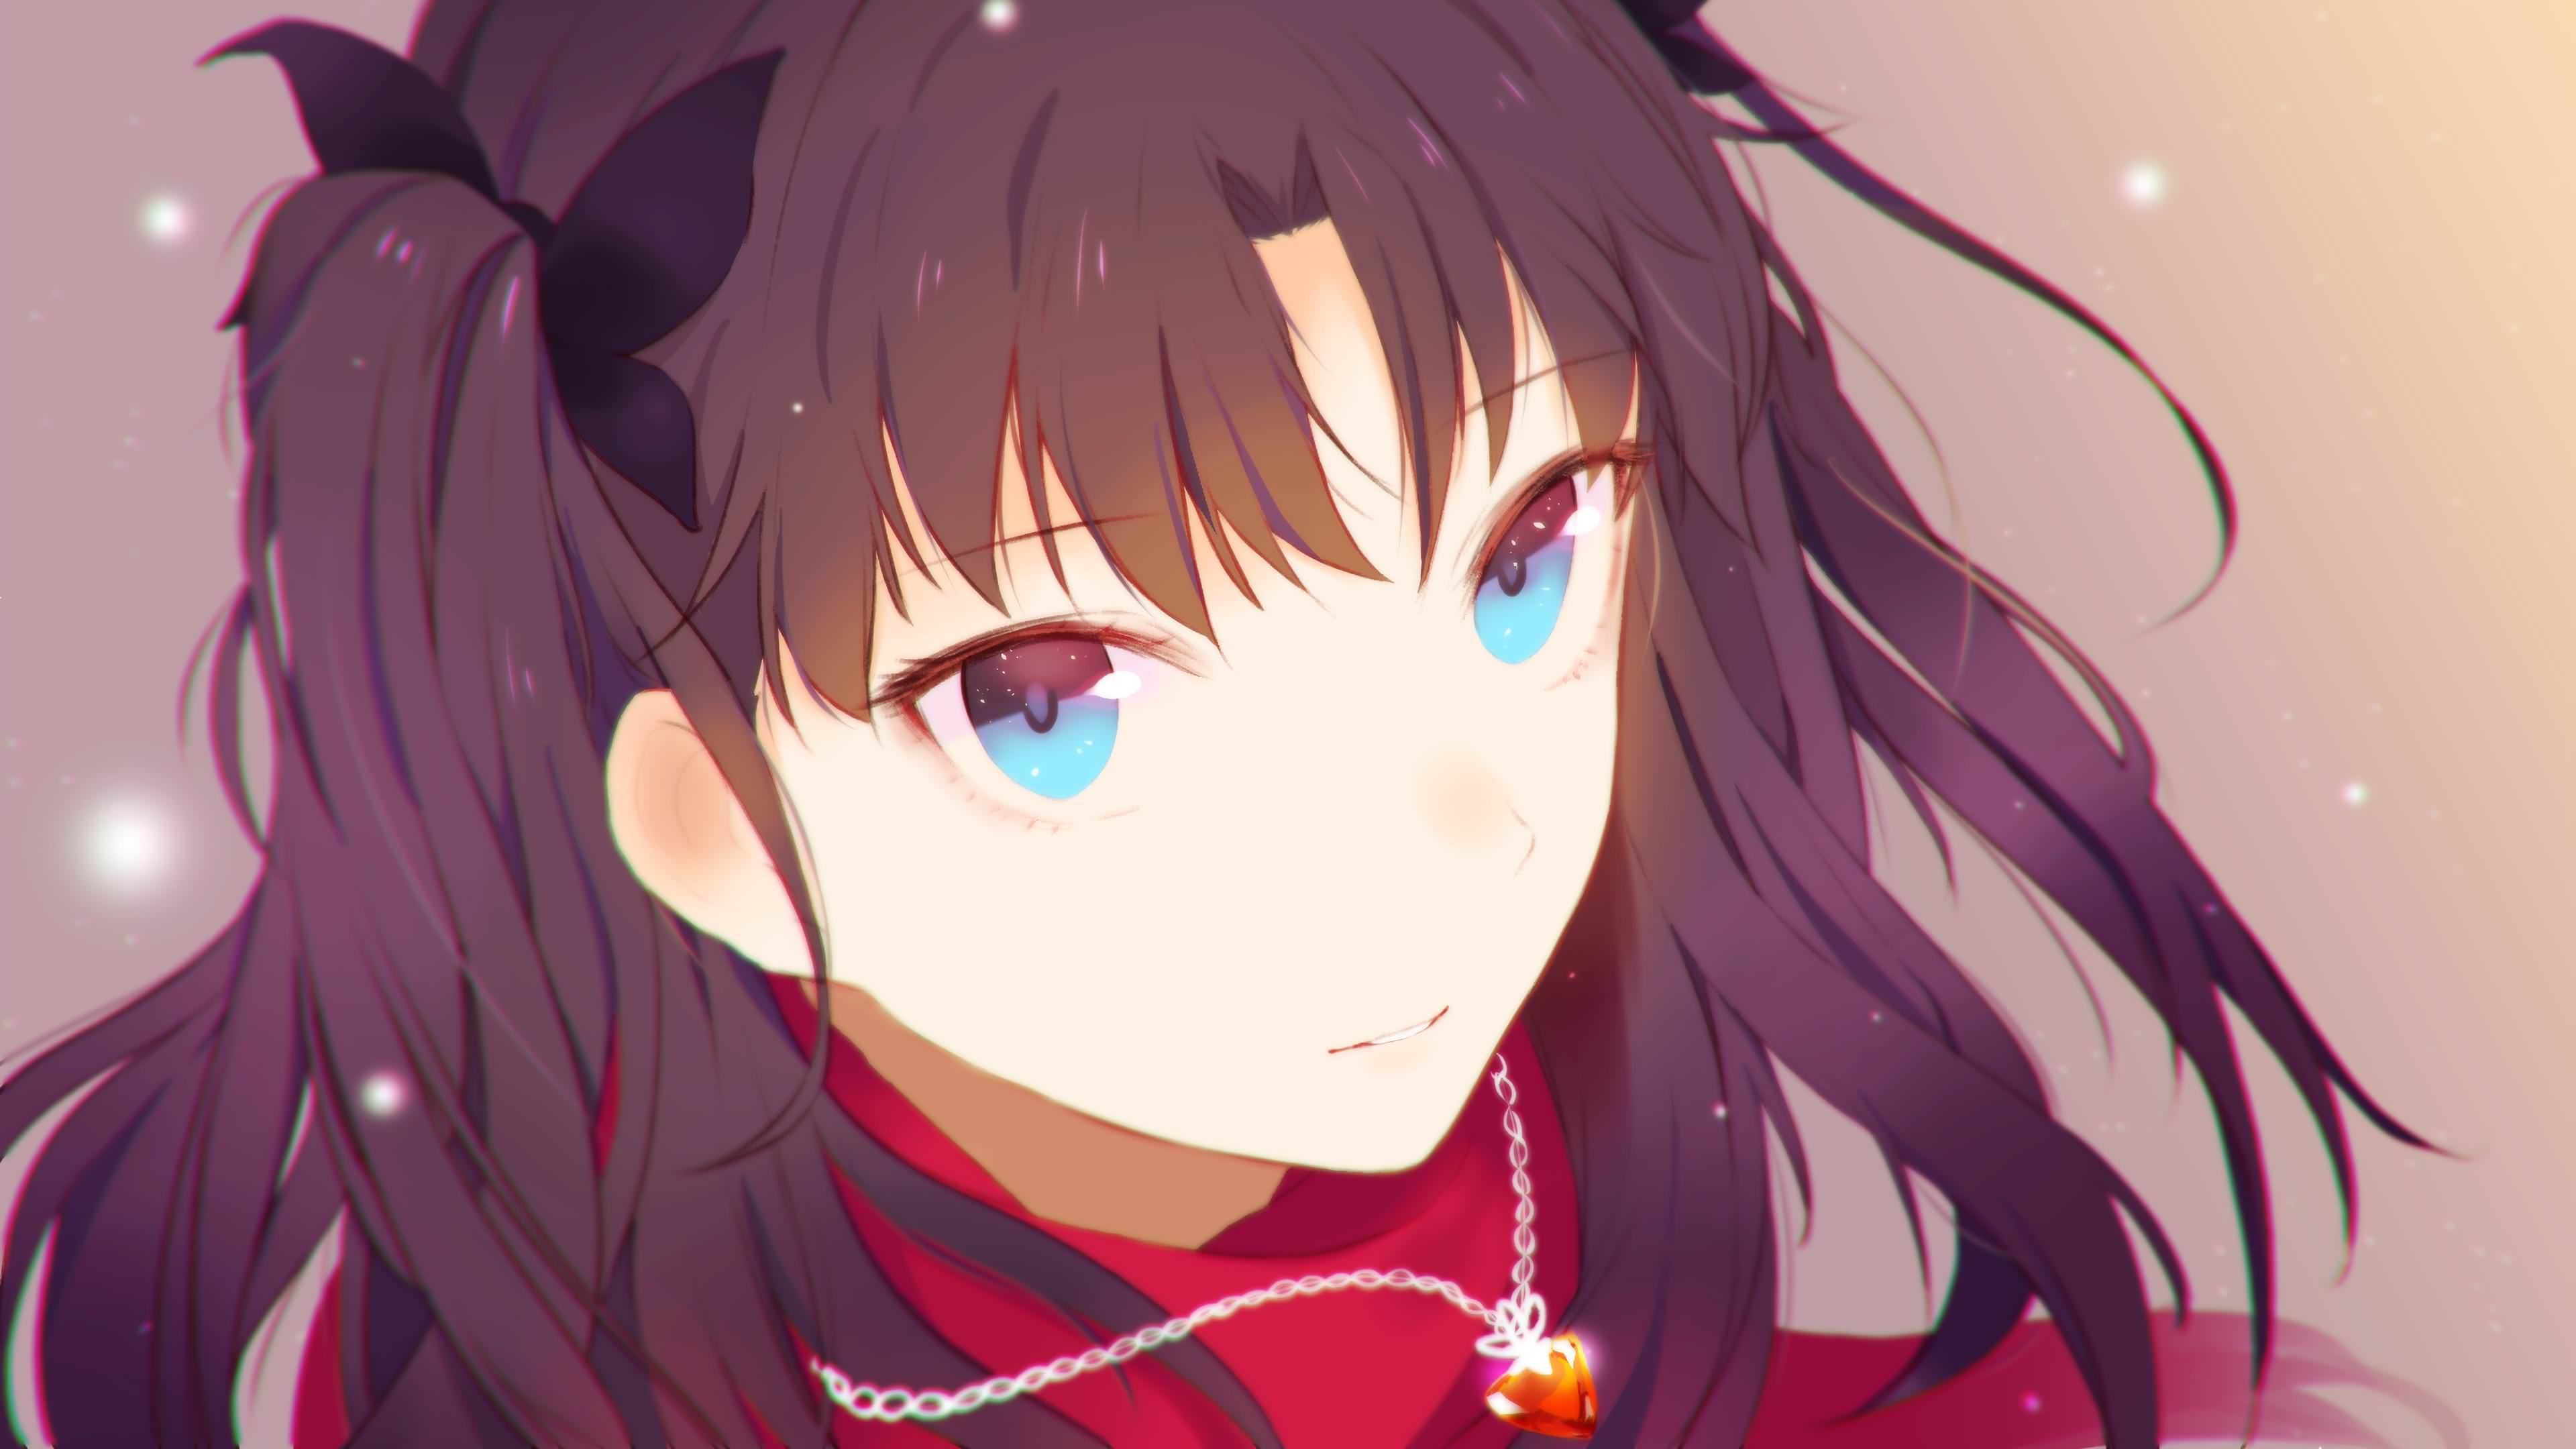 Rin Tohsaka Fate Stay Night Anime 4k, HD Anime, 4k Wallpapers, Images